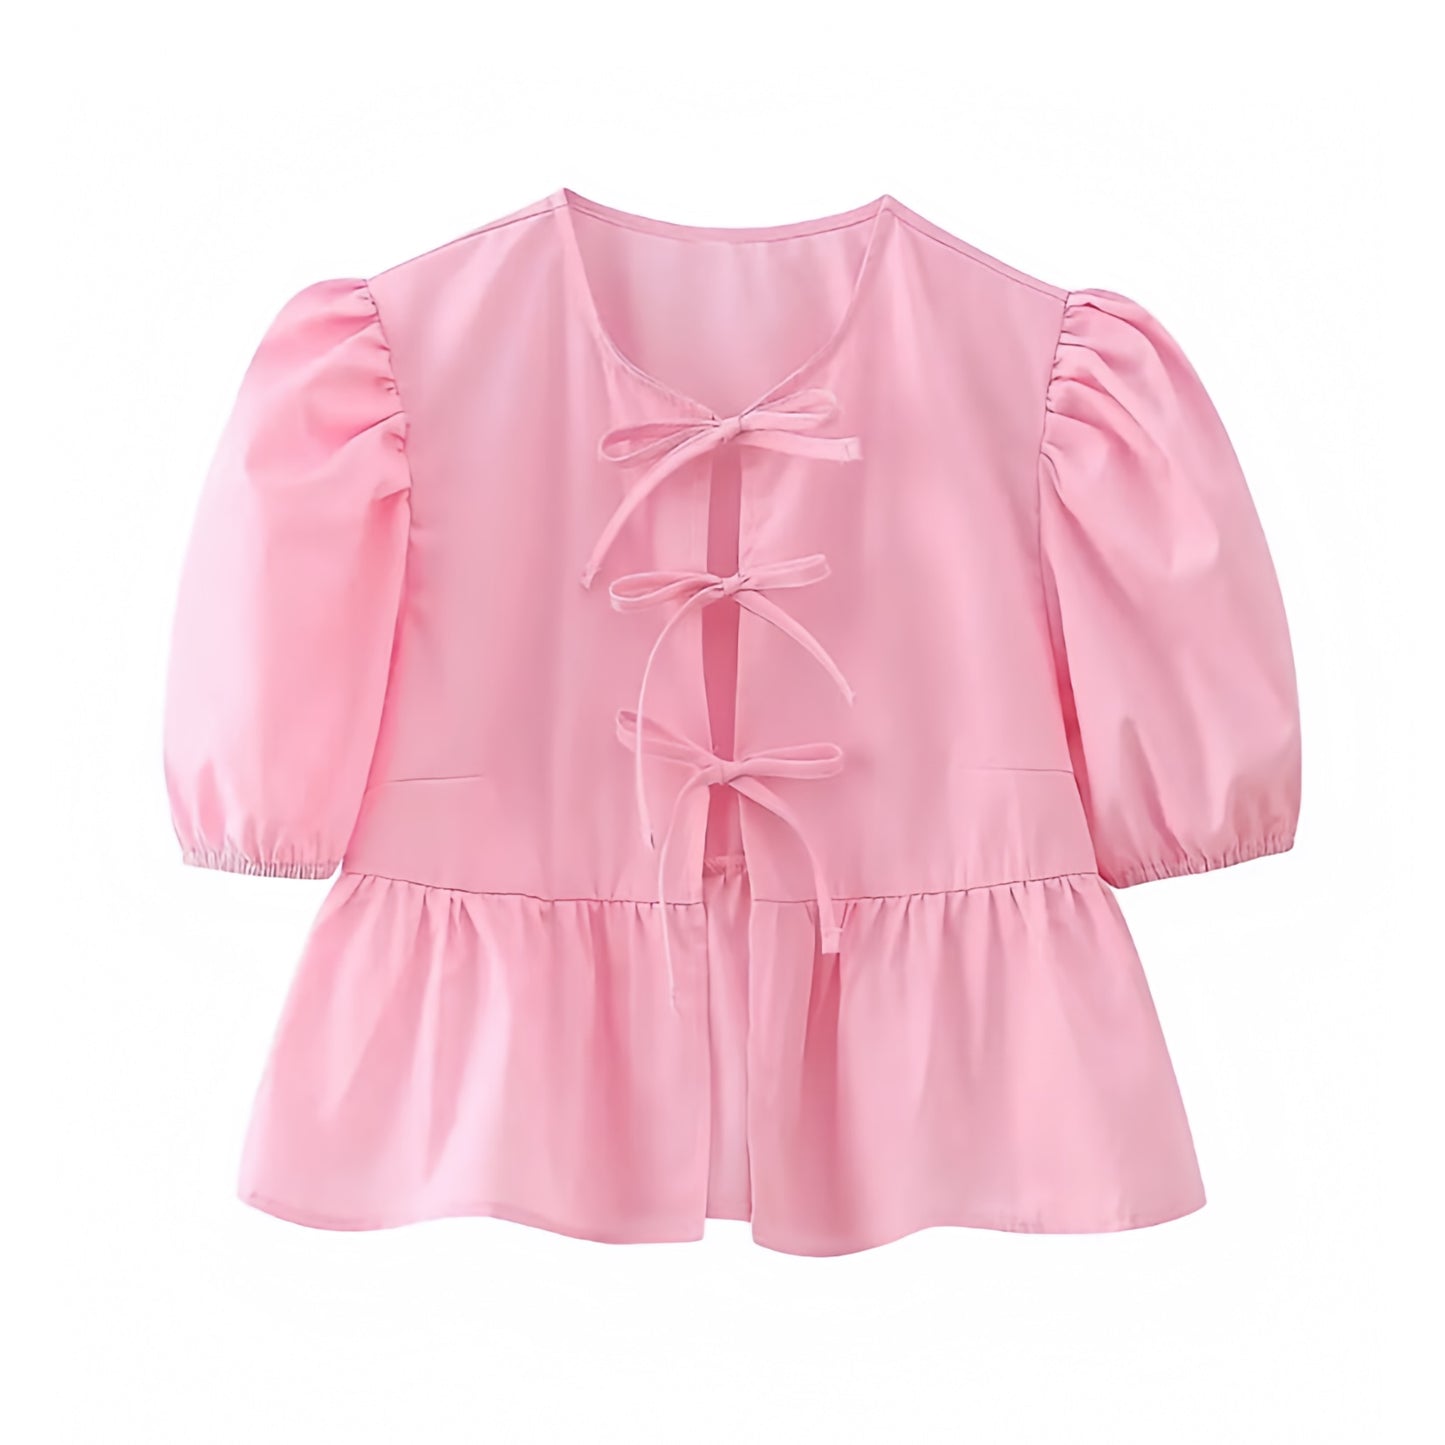 light-pink-bow-lace-up-round-neck-cut-out-ruffled-short-puff-sleeve-loose-fit-oversized-linen-crop-camisole-top-blouse-t-shirt-baby-tee-women-ladies-chic-trendy-spring-2024-summer-elegant-casual-feminine-preppy-style-coquette-dollette-pilates-princess-ballet-core-style-zara-revolve-aritzia-urban-outfitters-brandy-melville-pacsun-garage-altard-state